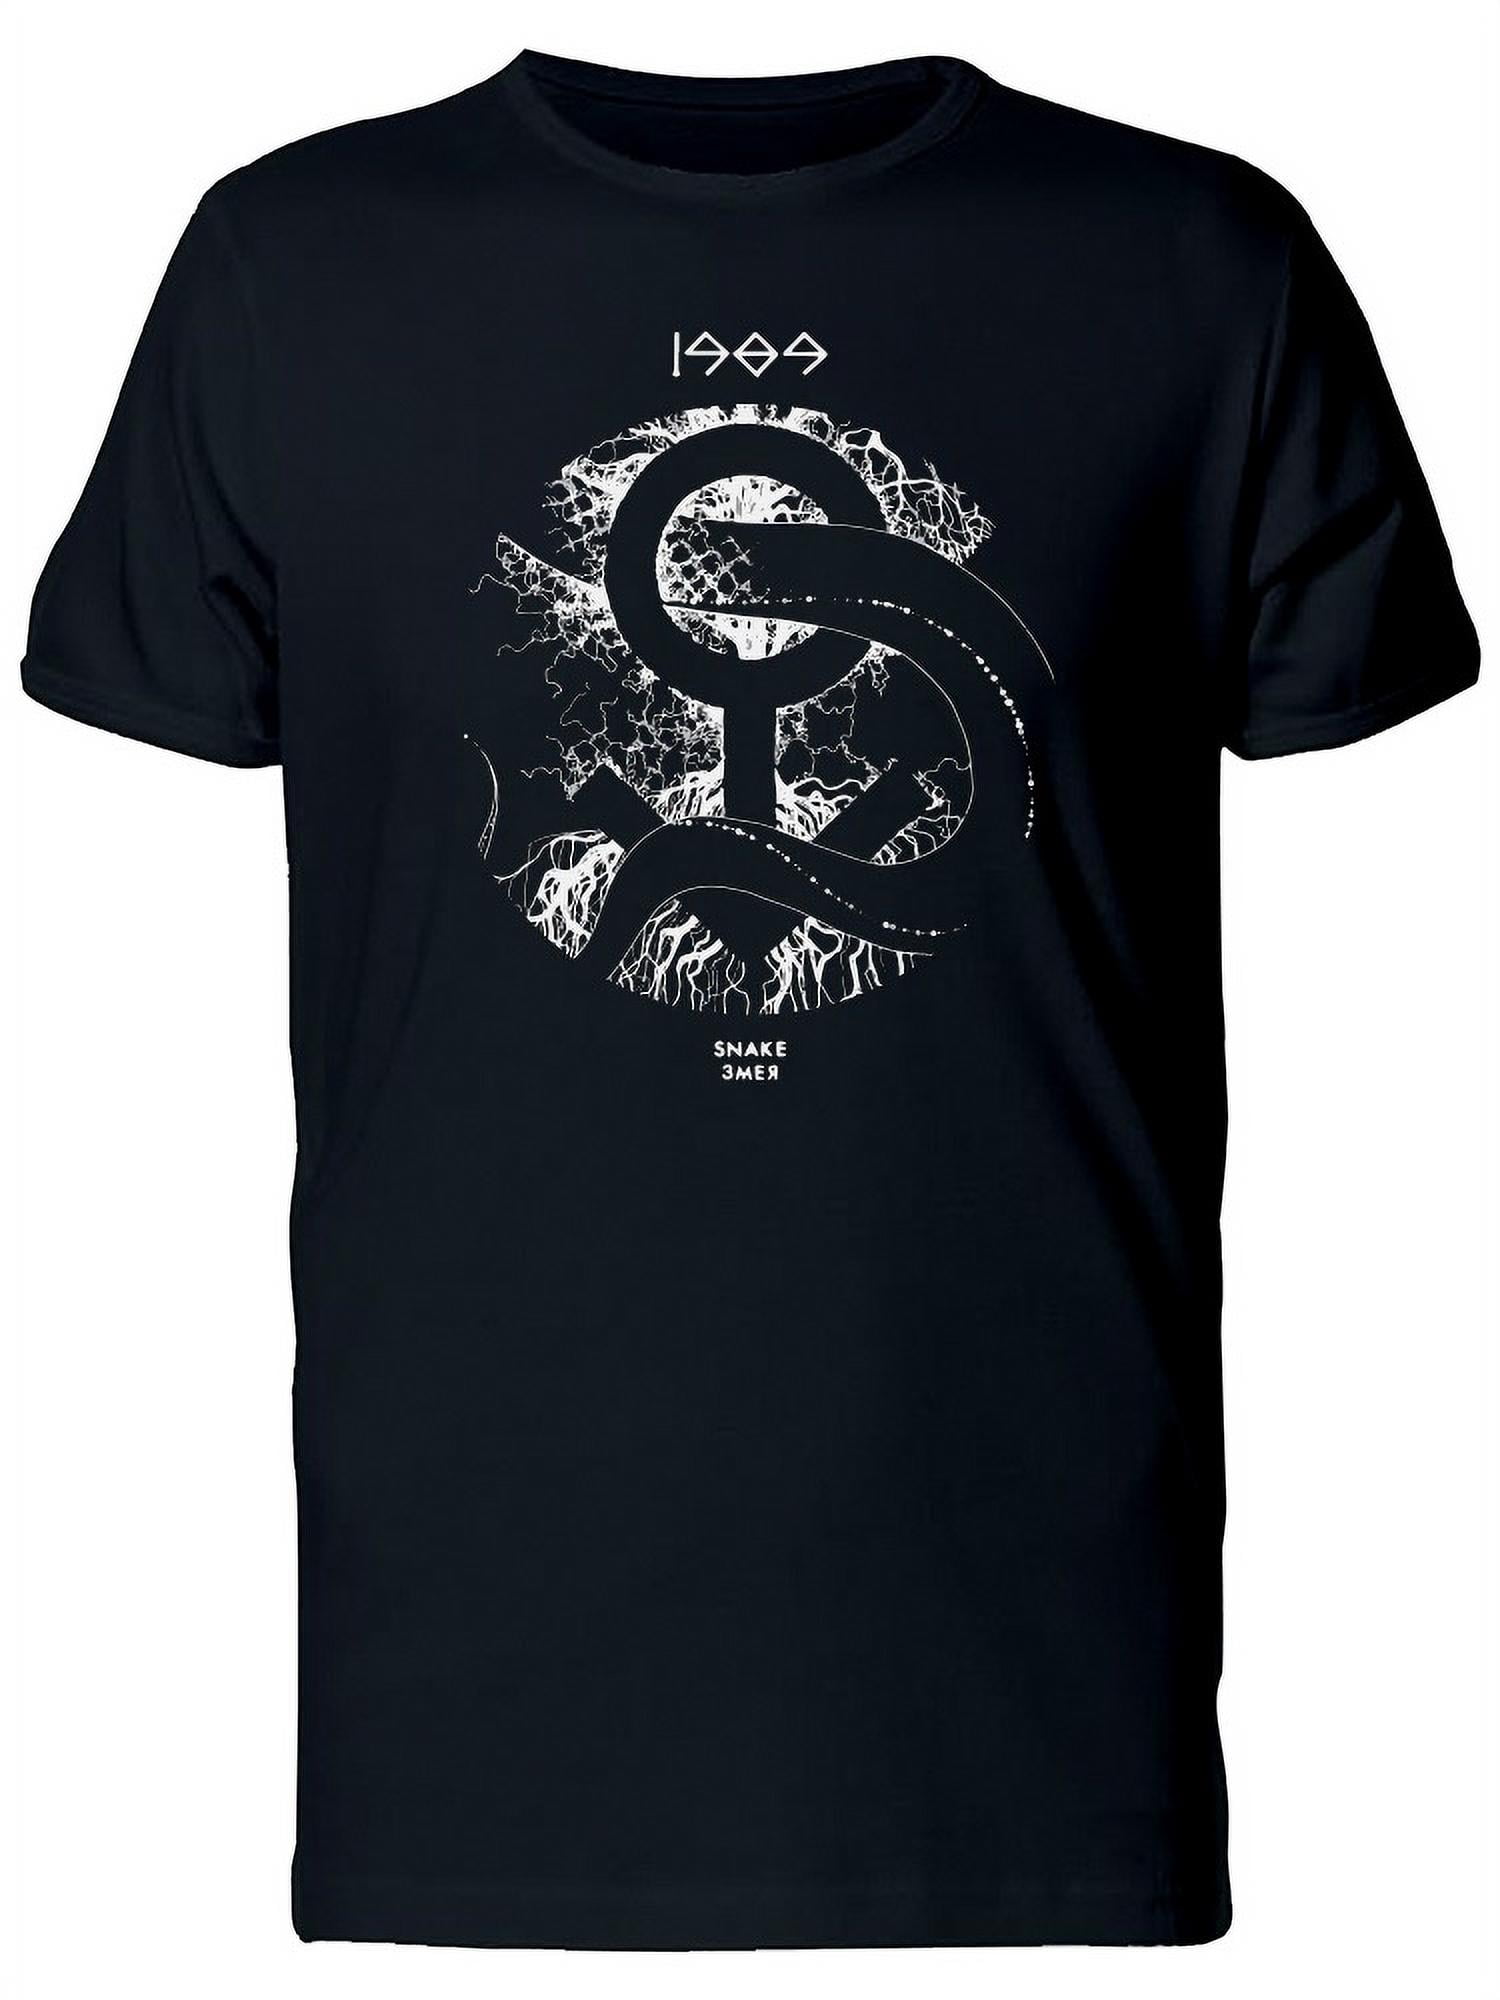 Vintage Snake And Male Symbol Tee Men's -Image by Shutterstock ...